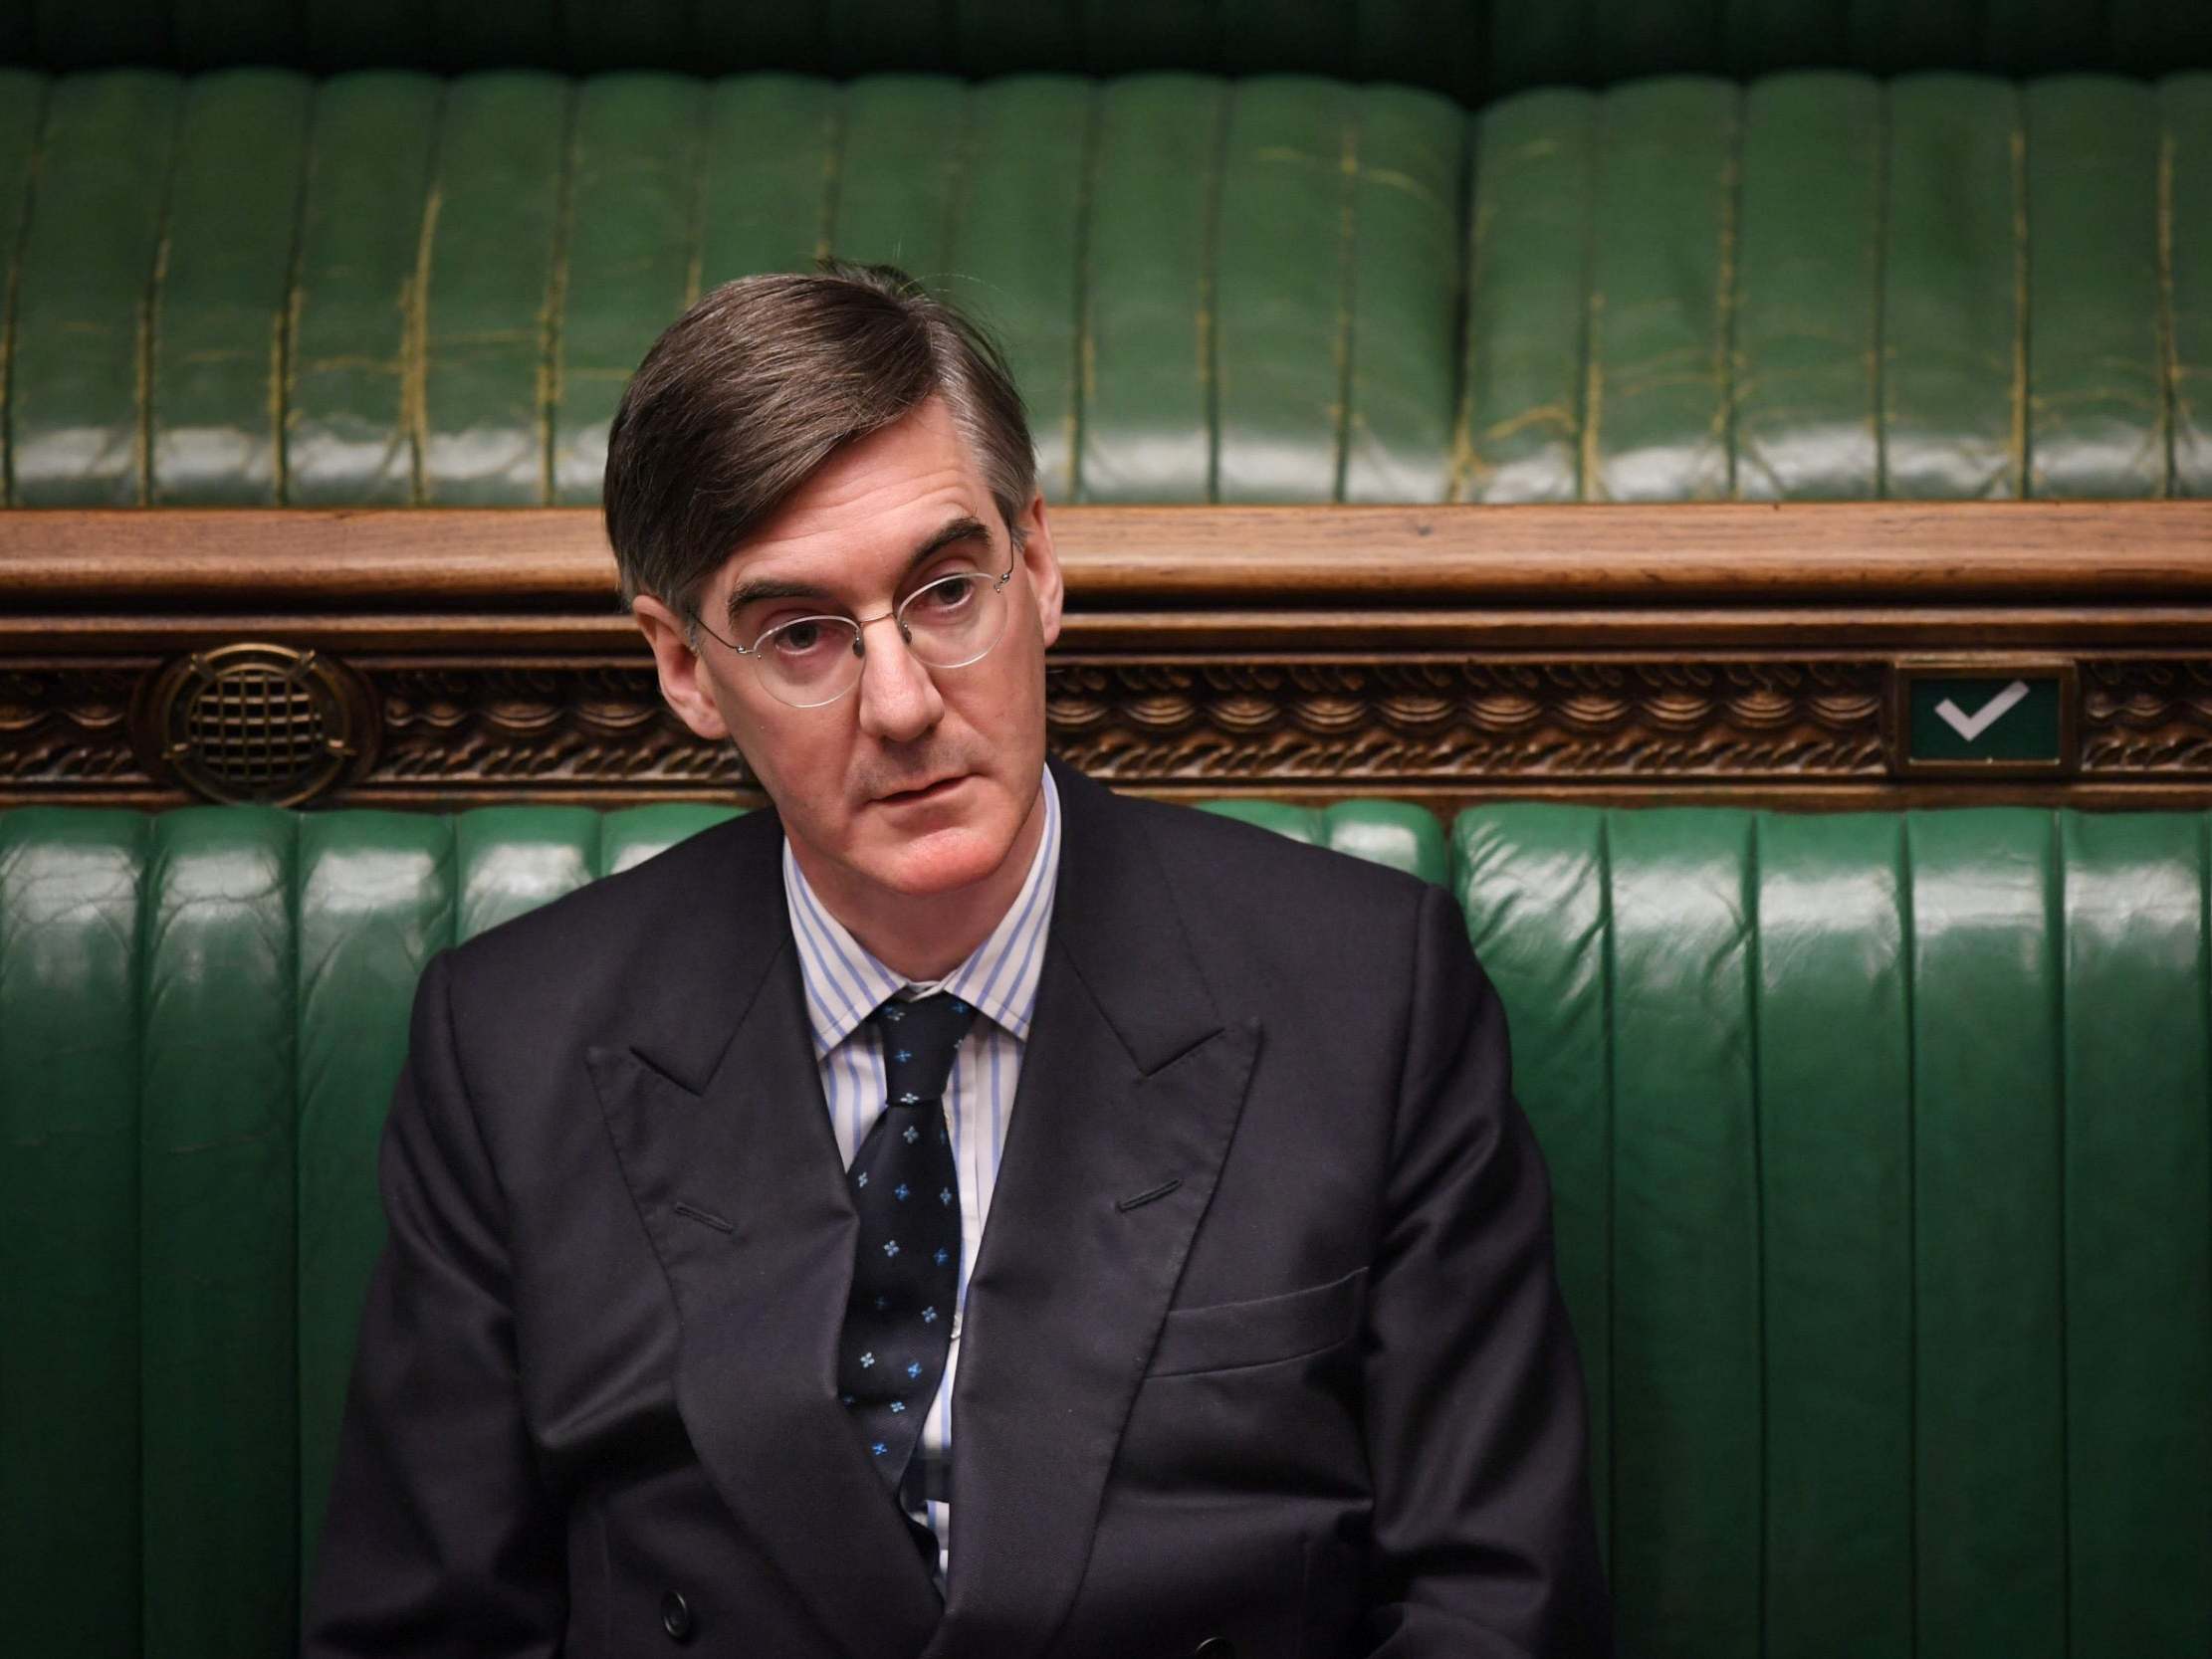 ‘admission Of Corruption Jacob Rees Mogg Mocked After Claim About Russian Money Backfires